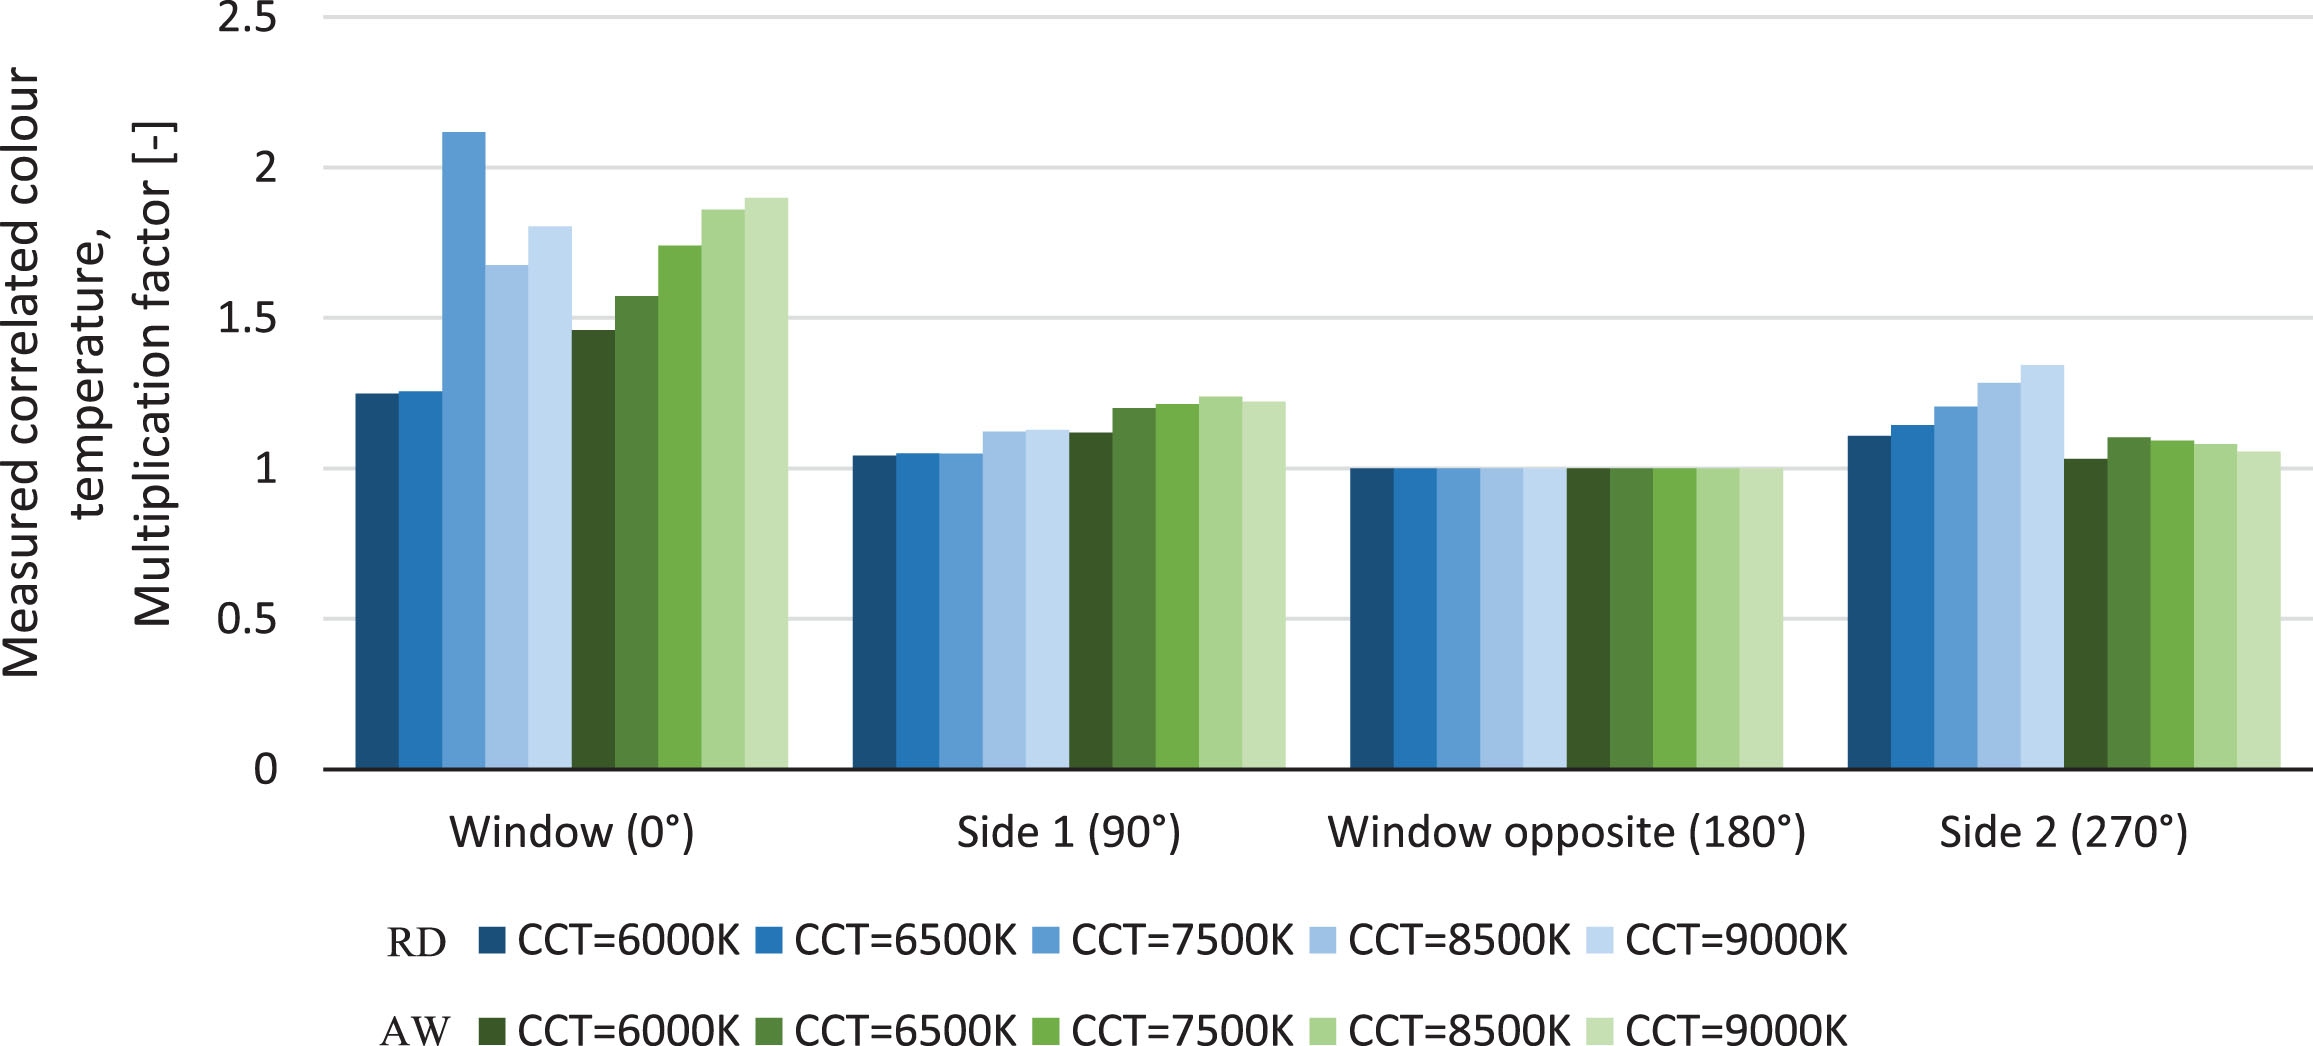 Experimental studies: Differences in multiplication factors of correlated colour temperatures among the four viewing directions, expressed in multiplication factors. Notes: RD: Real daylight; AW: Artificial window; CCT: Outdoor CCT in the RD setup, or CCT of the artificial window in the AW setup.